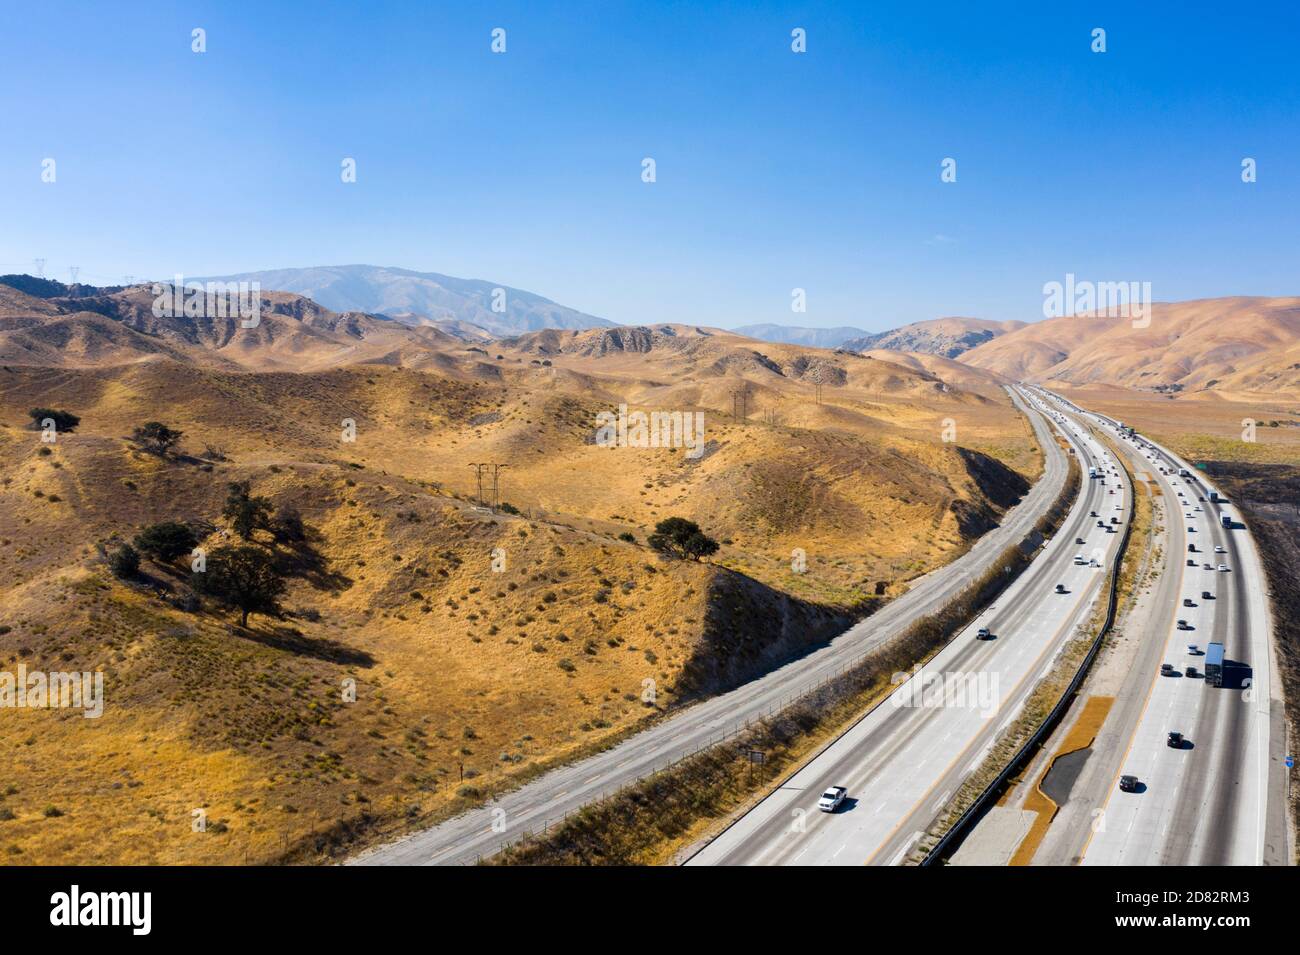 Aerial view of interstate 5 passing the golden hills at Tejon Pass in Gorman, along the San Andreas Fault, California Stock Photo